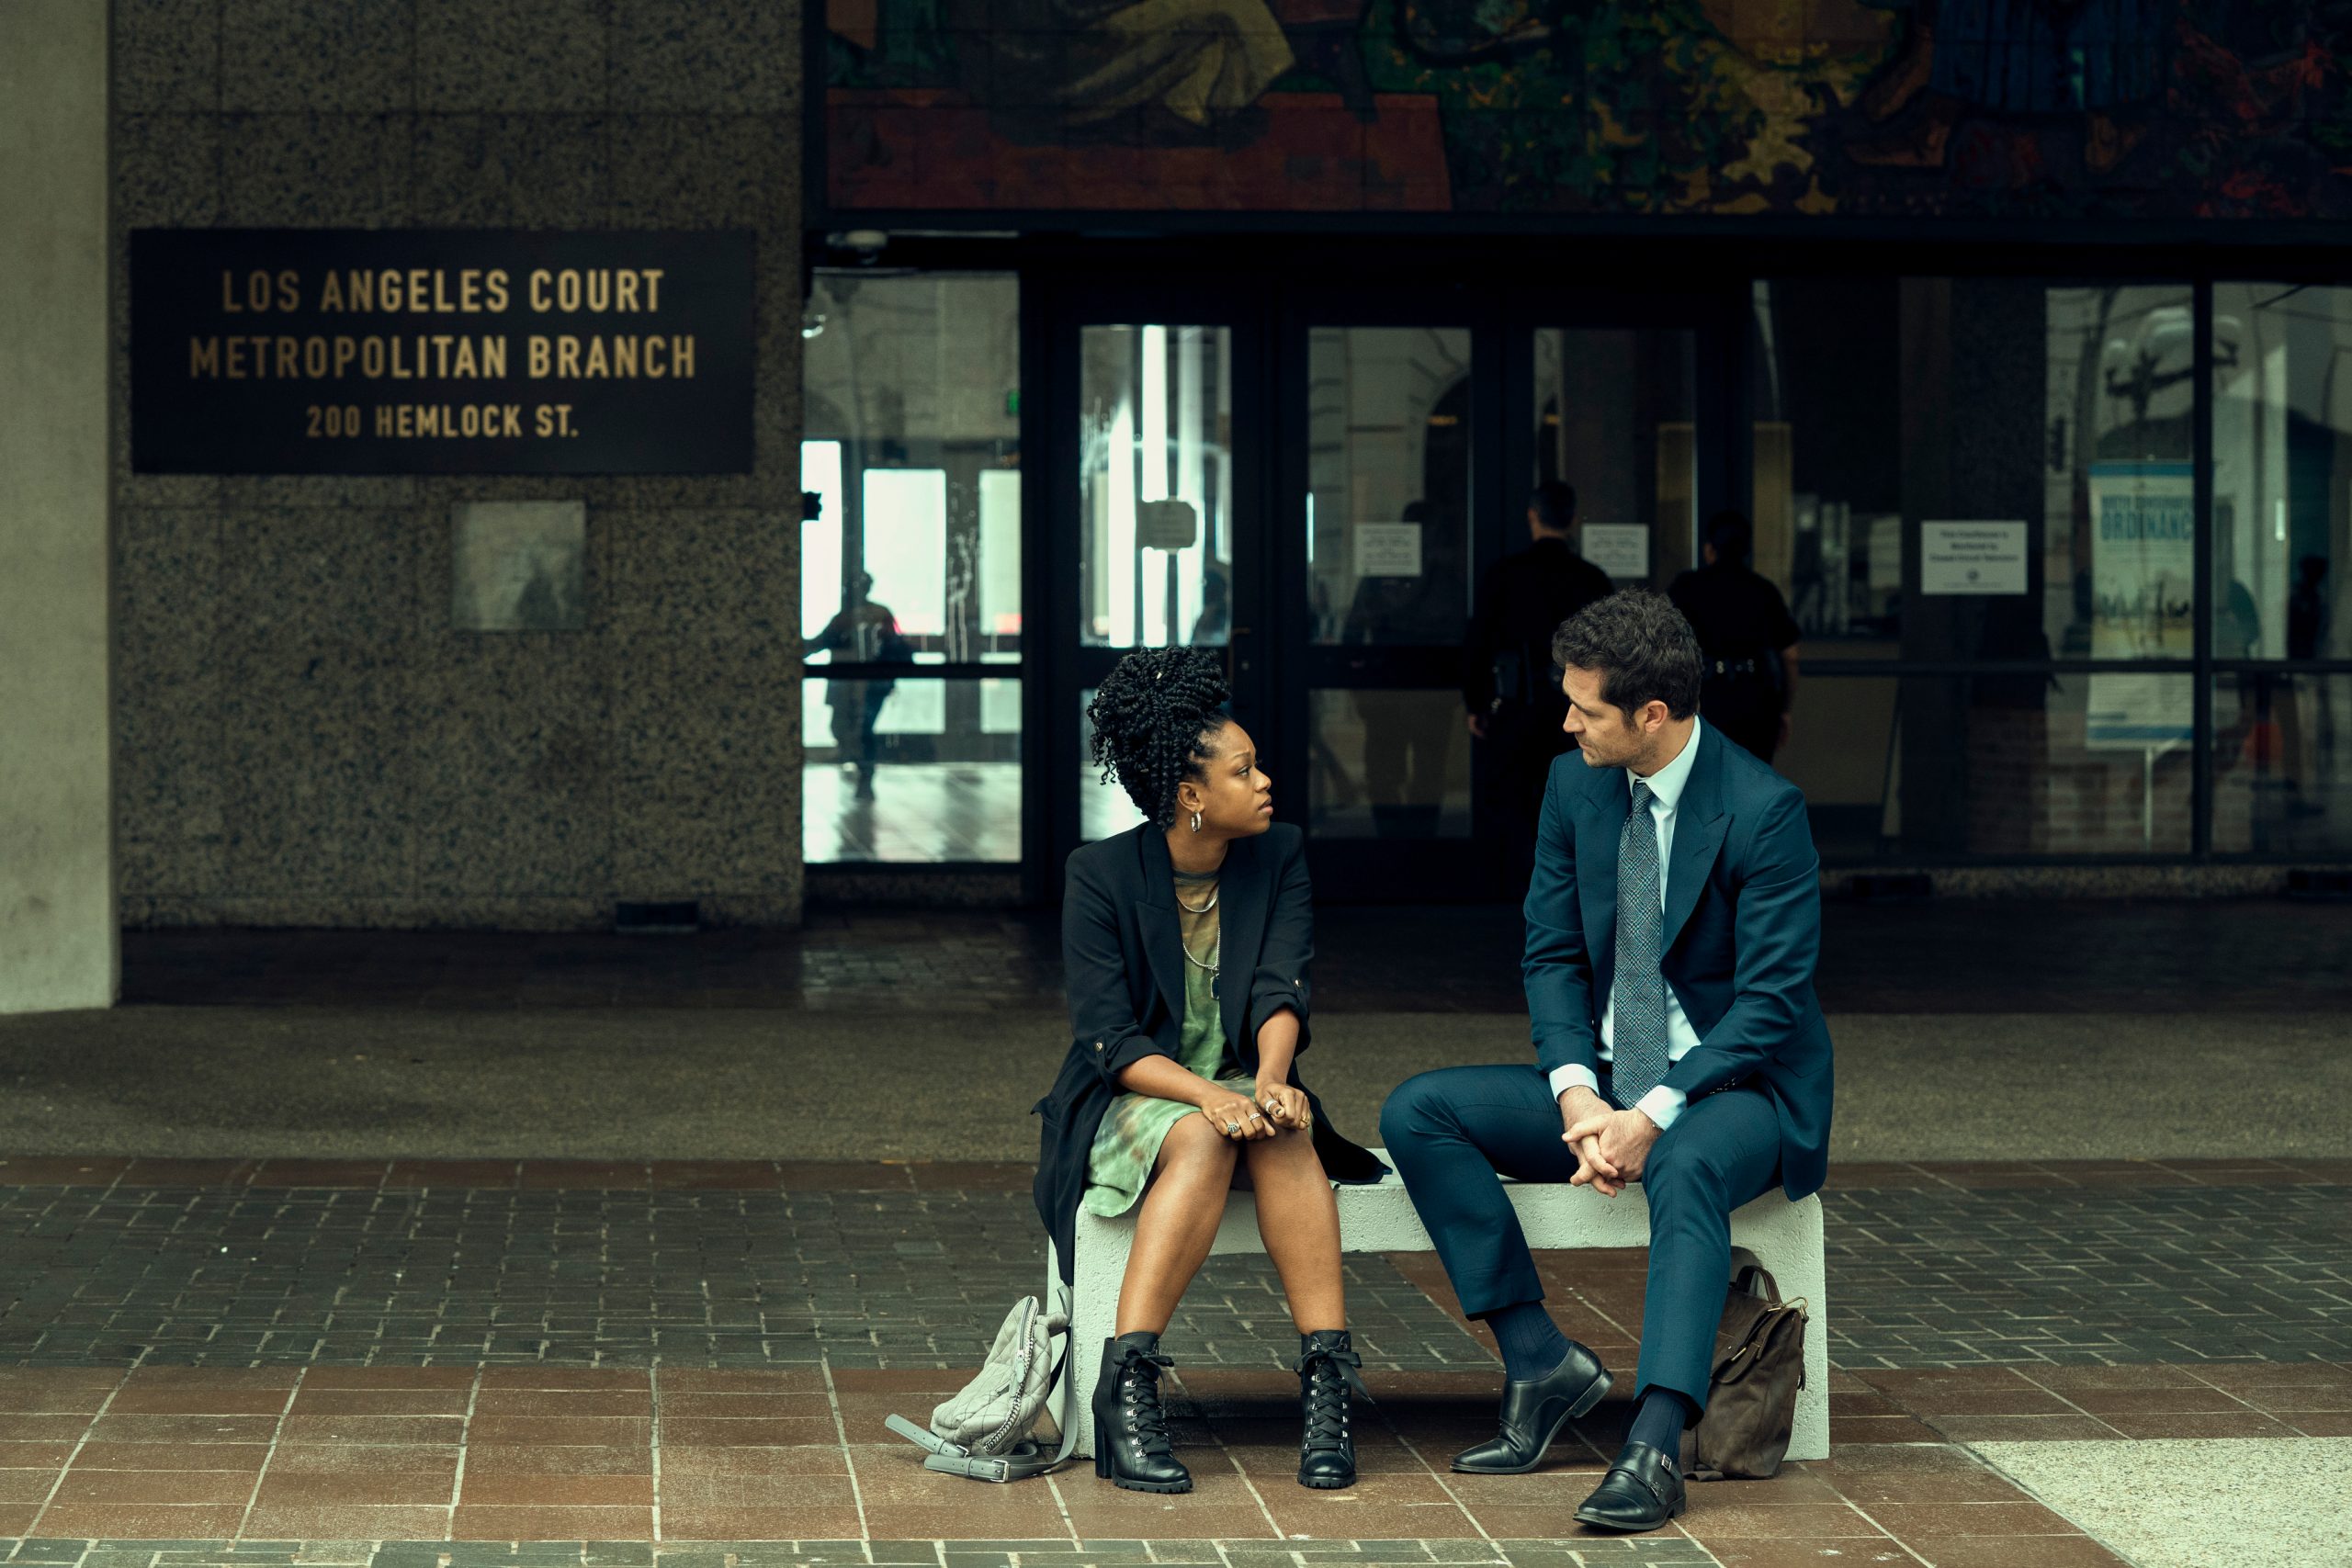 The Lincoln Lawyer. (L to R) Jazz Raycole as Izzy, Manuel Garcia-Rulfo as Mickey Haller in episode 101 of The Lincoln Lawyer. Cr. Lara Solanki/Netflix © 2022